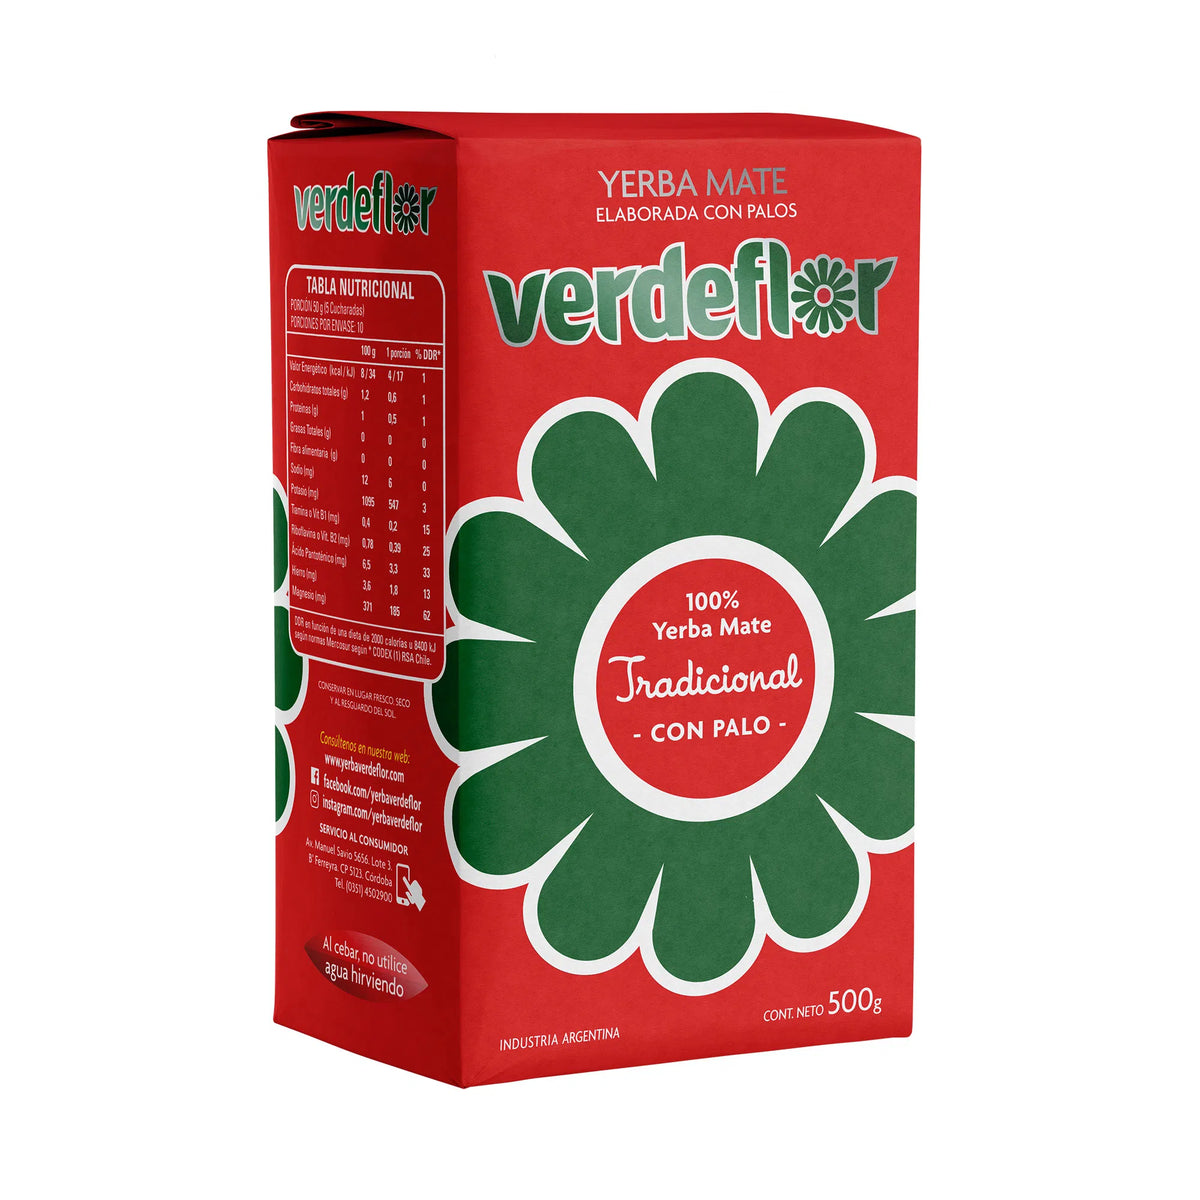 Verdeflor Yerba Mate with Palo and Poleo, Mint and Ginger Flavor